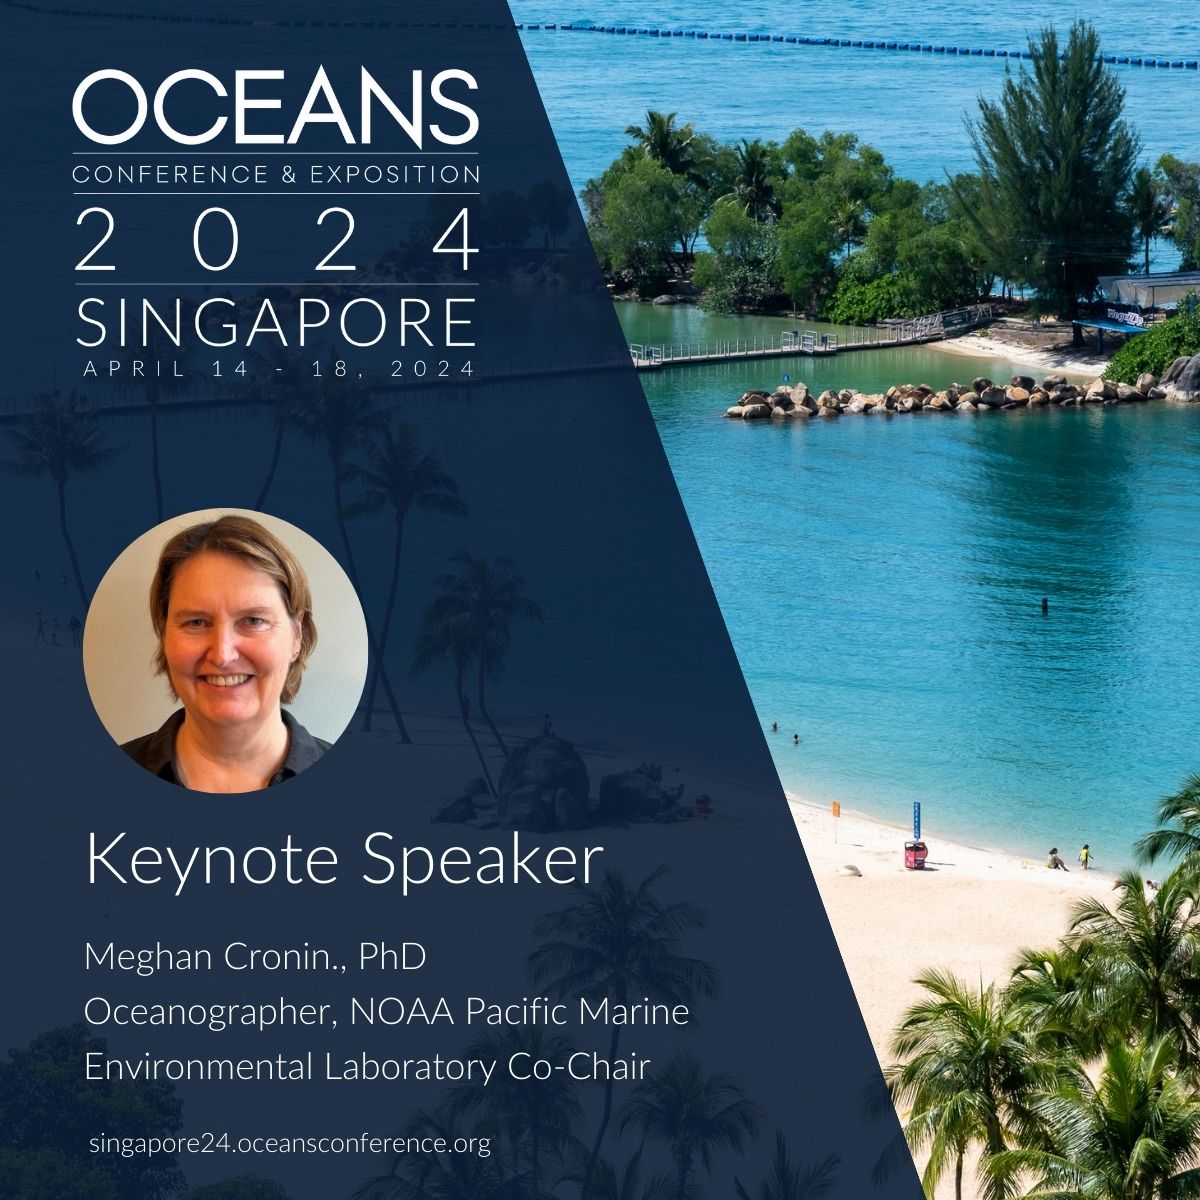 ⏱️Time's ticking! Just over a month to register for OCEANS 2024 Singapore. Don't miss the chance to hear from our keynote speaker, Dr. Meghan Cronin. 👉Register today: singapore24.oceansconference.org/experience/reg… #OCEANS2024Singapore #KeynoteSpeaker #RegisterToday